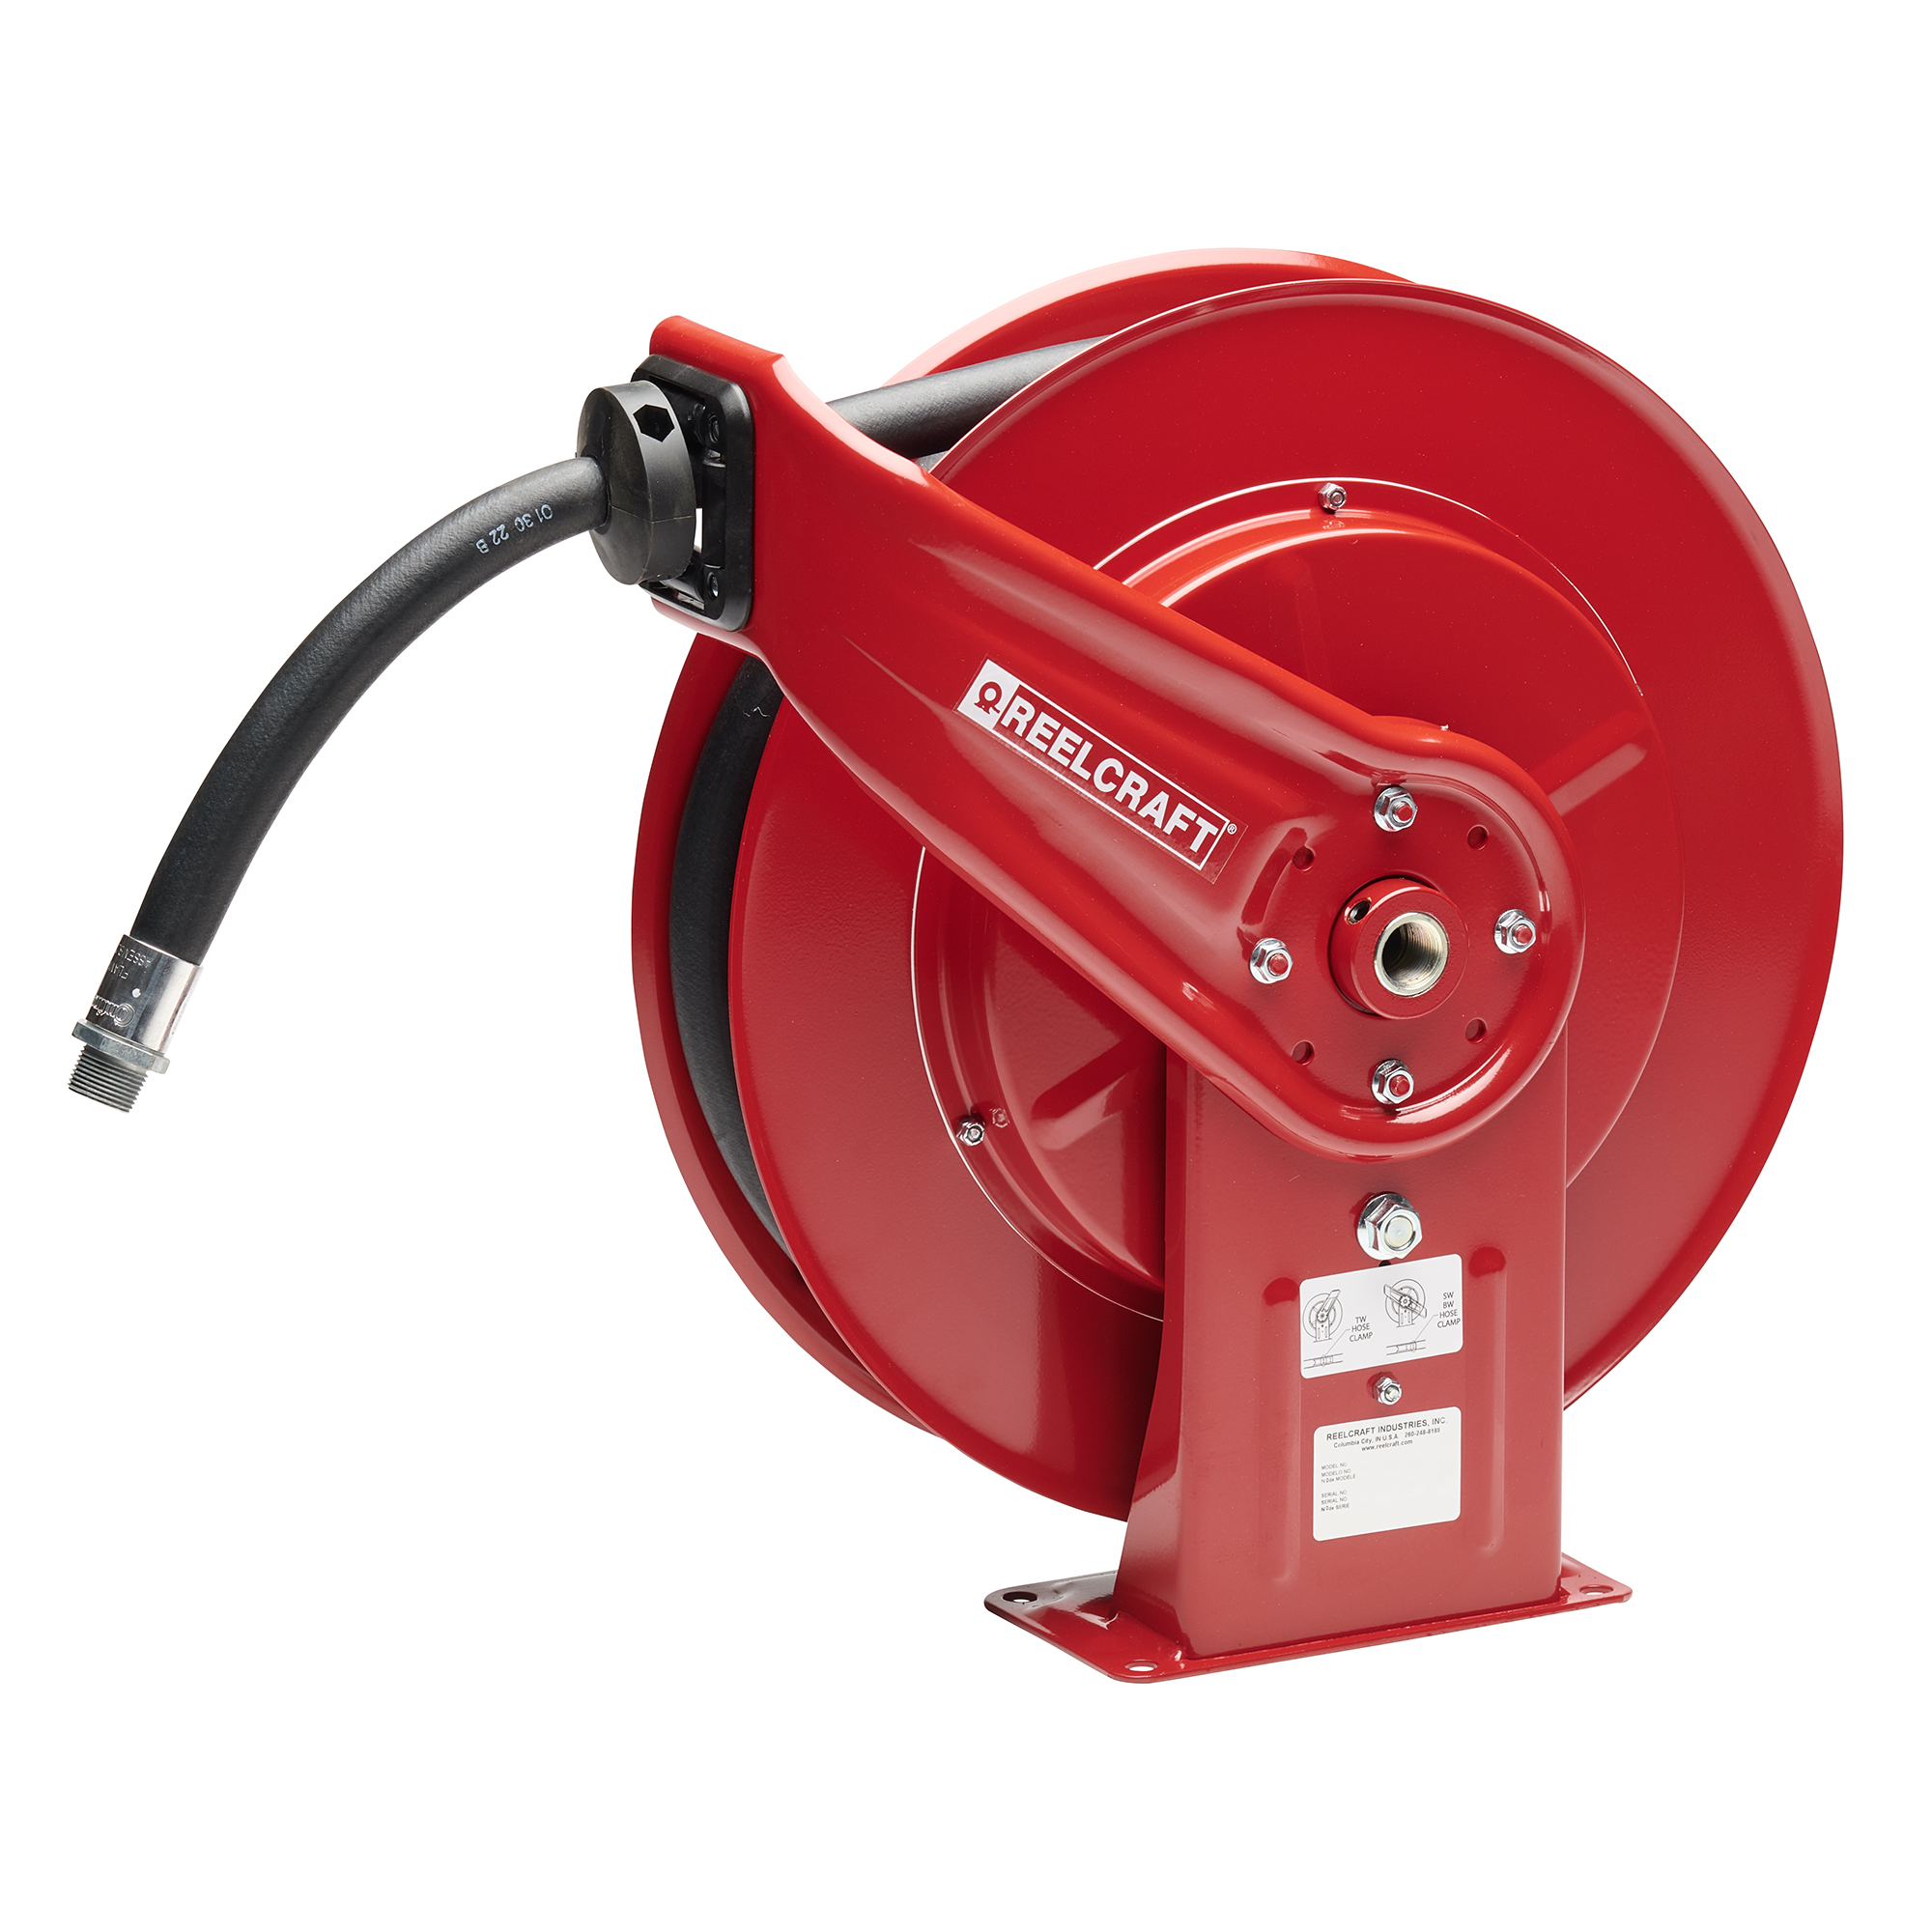 Fixed fire hose reel (Automatic) - TPMCSTEEL, fire hose